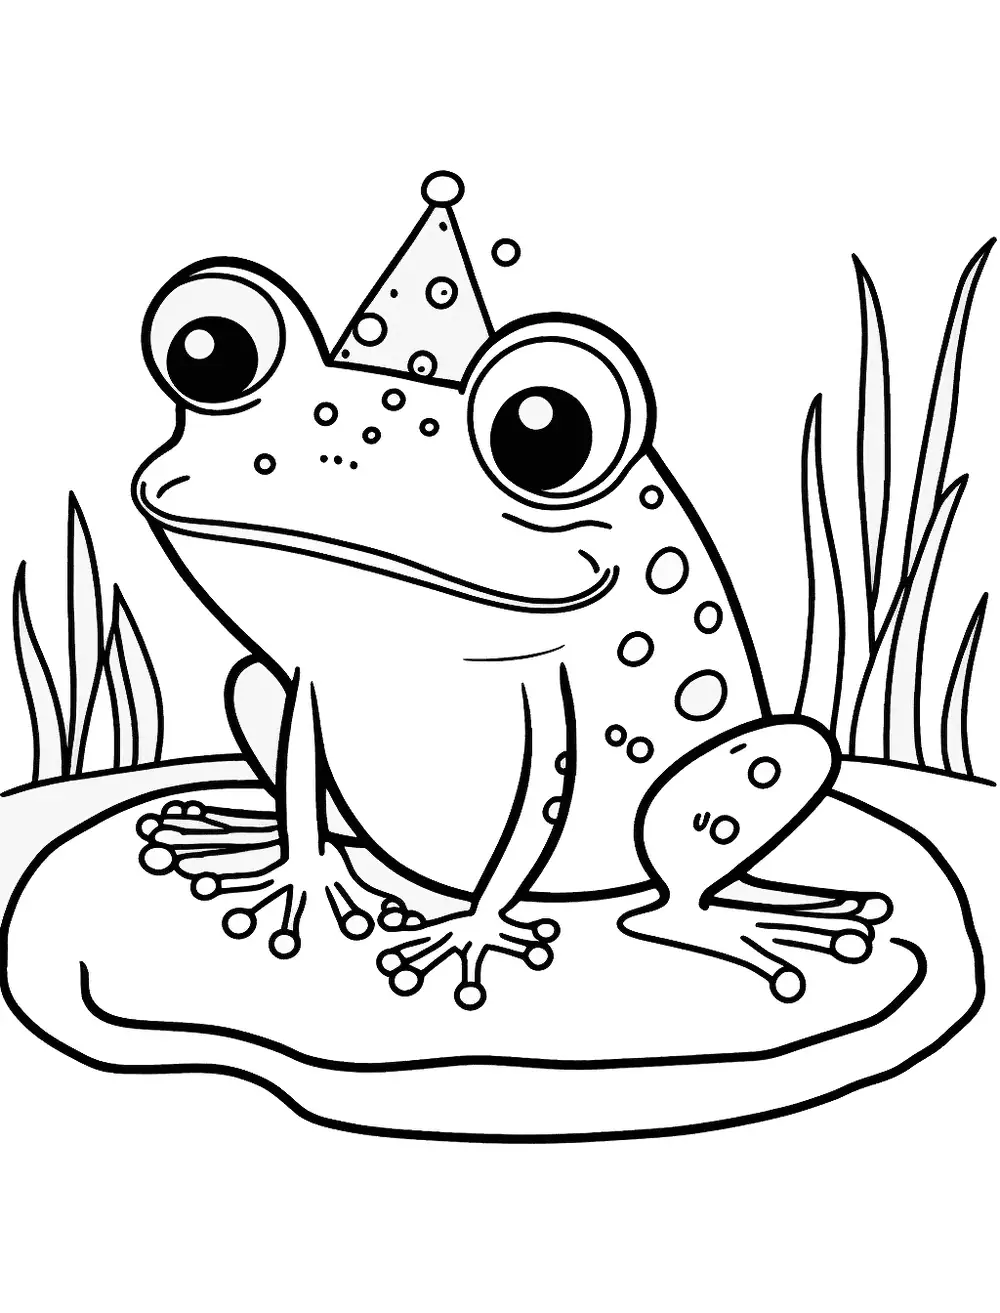 Birthday Frog Coloring Page - A frog celebrating his birthday with a cake and a birthday hat.